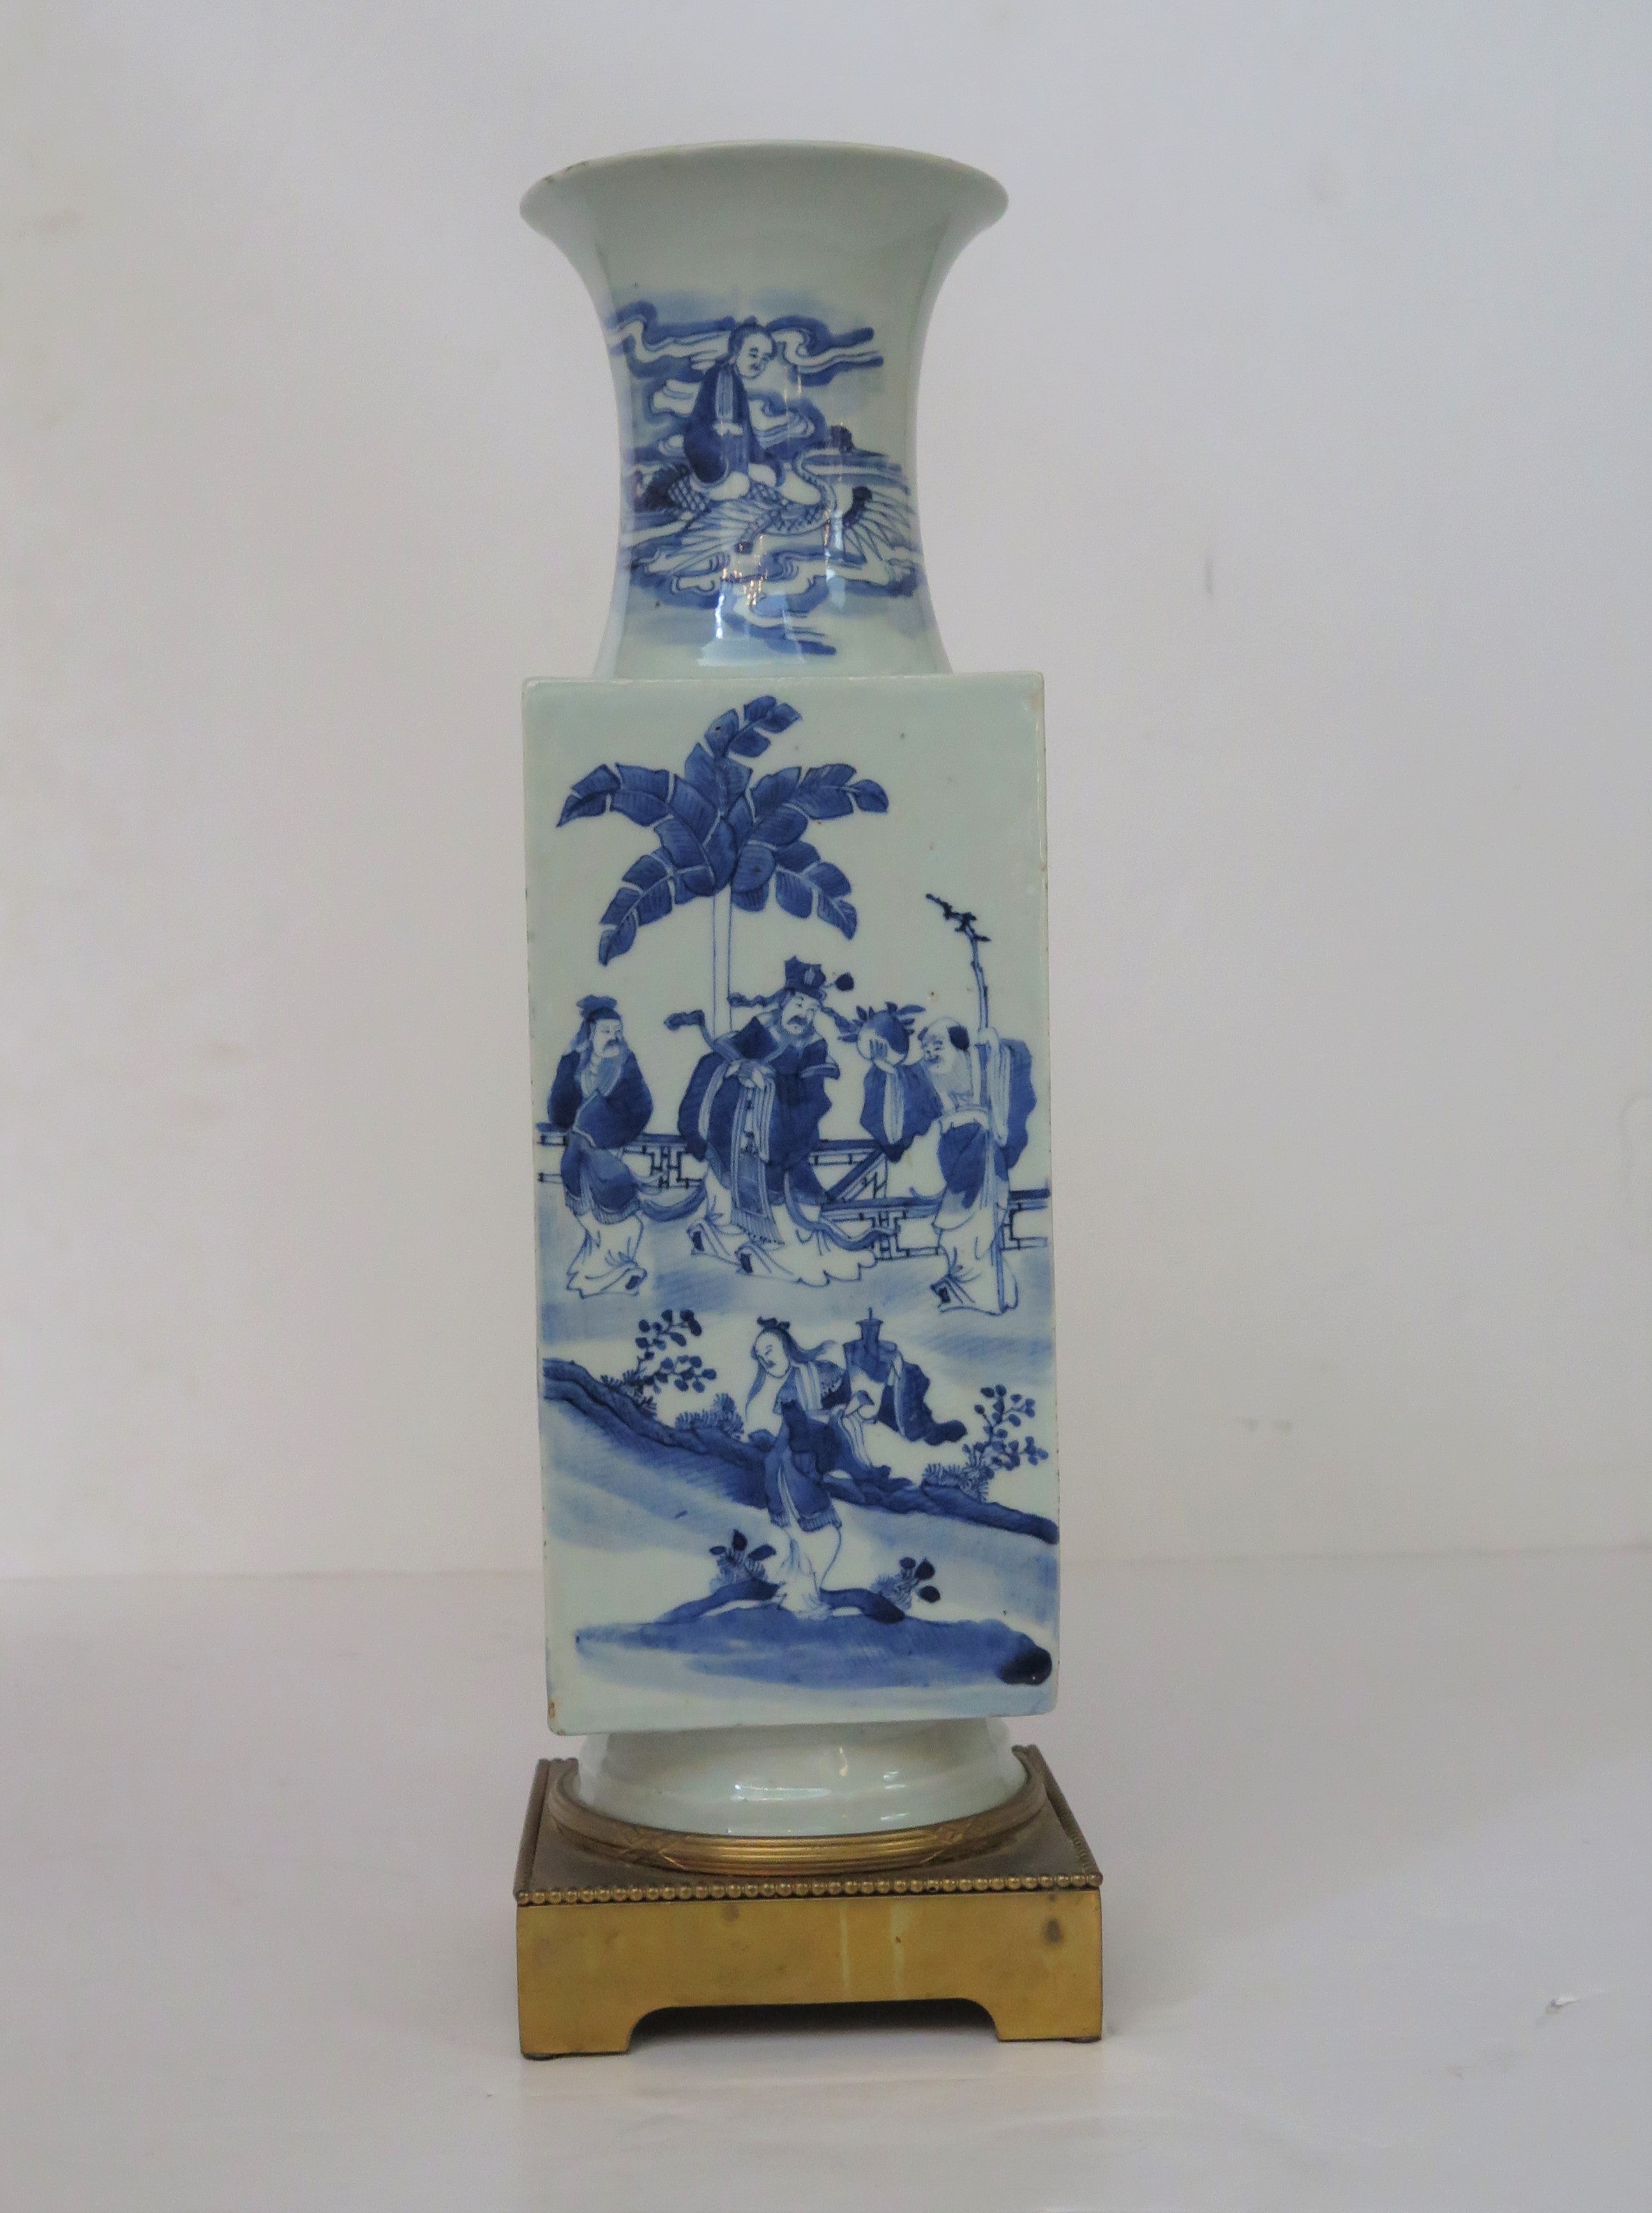 Qing Dynasty Blue And White Porcelain Vase In French Gilt Bronze Mount.